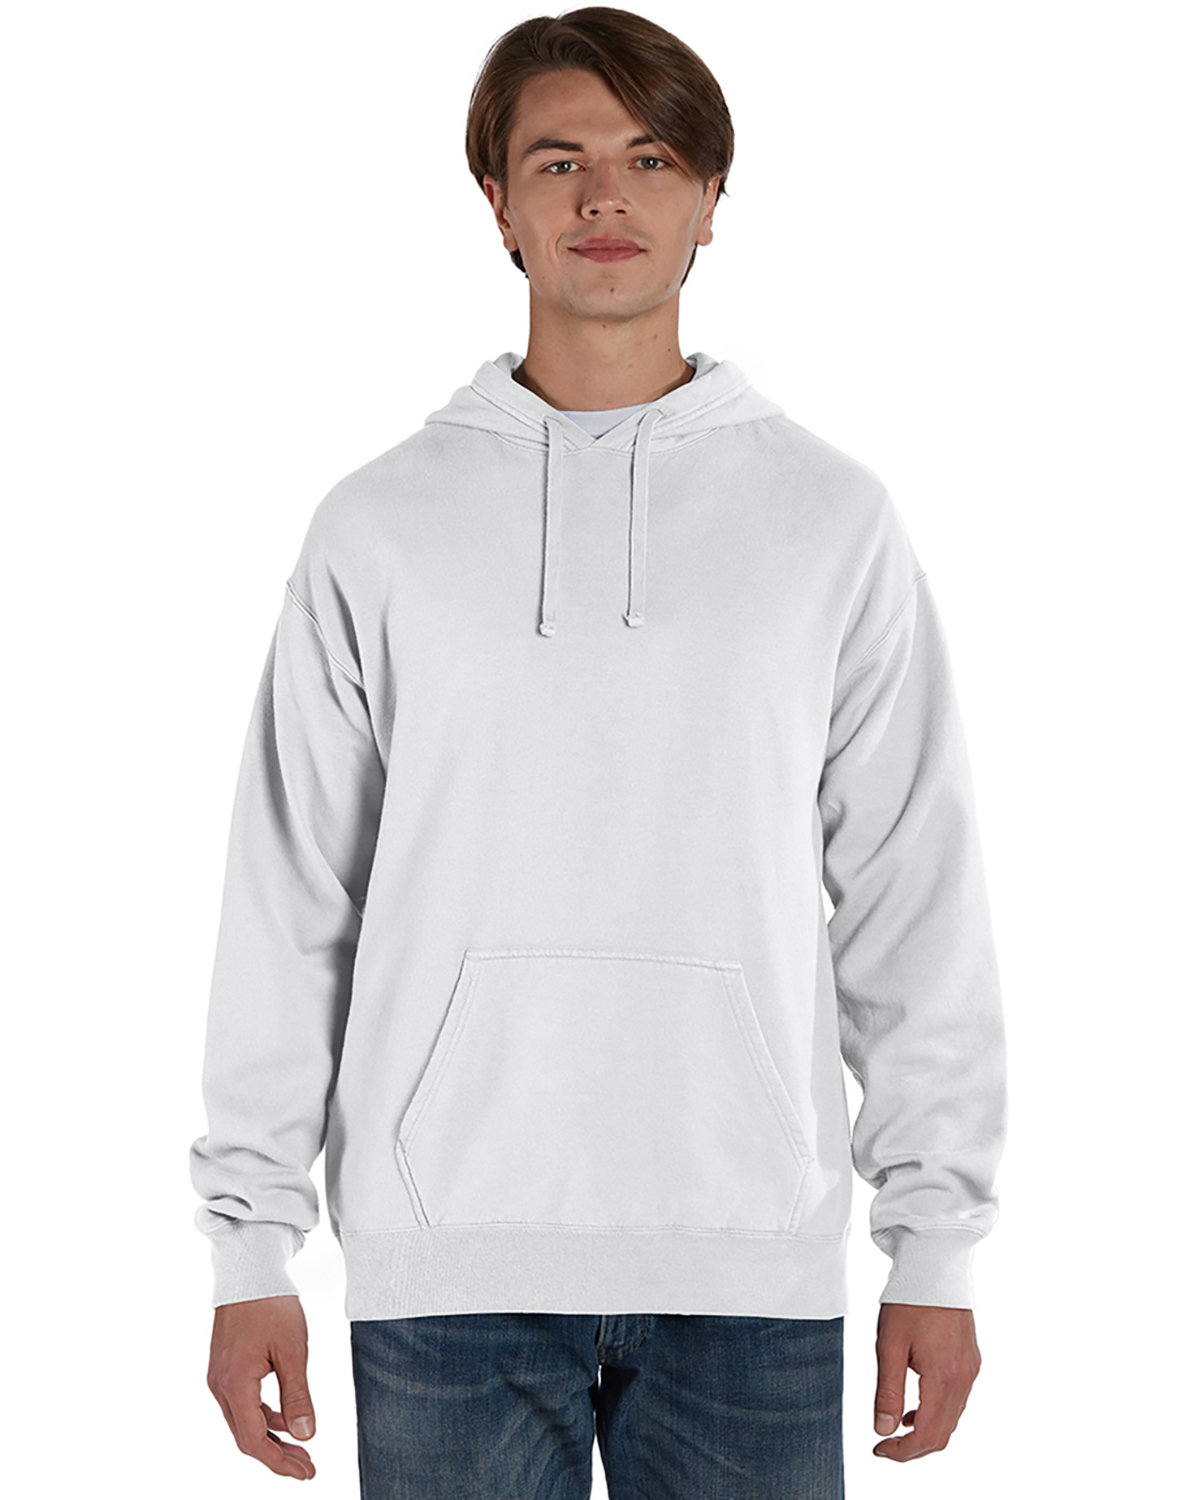 ComfortWash by Hanes Unisex Tearaway Pullover Hoodie WHITE PFD 